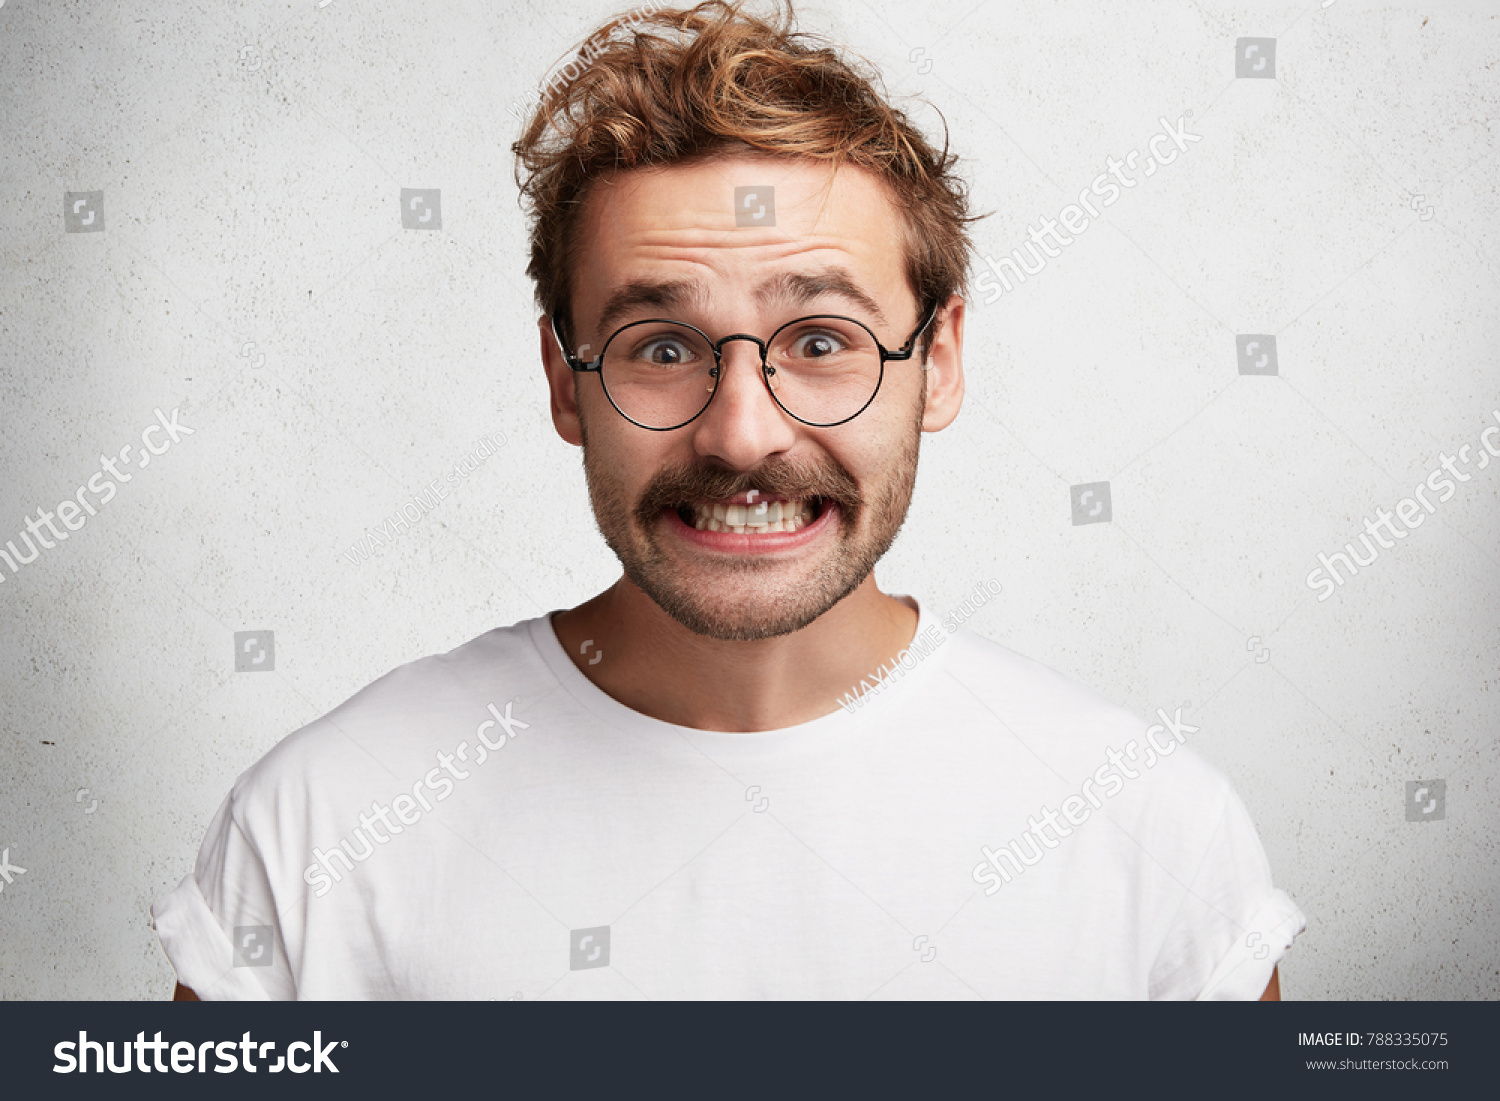 Funny attractive bearded young male with comic smile, has awkward look, pretends to be happy, looks gladfully through round spectacles, laughs at joke, isolated over white concrete background. #788335075